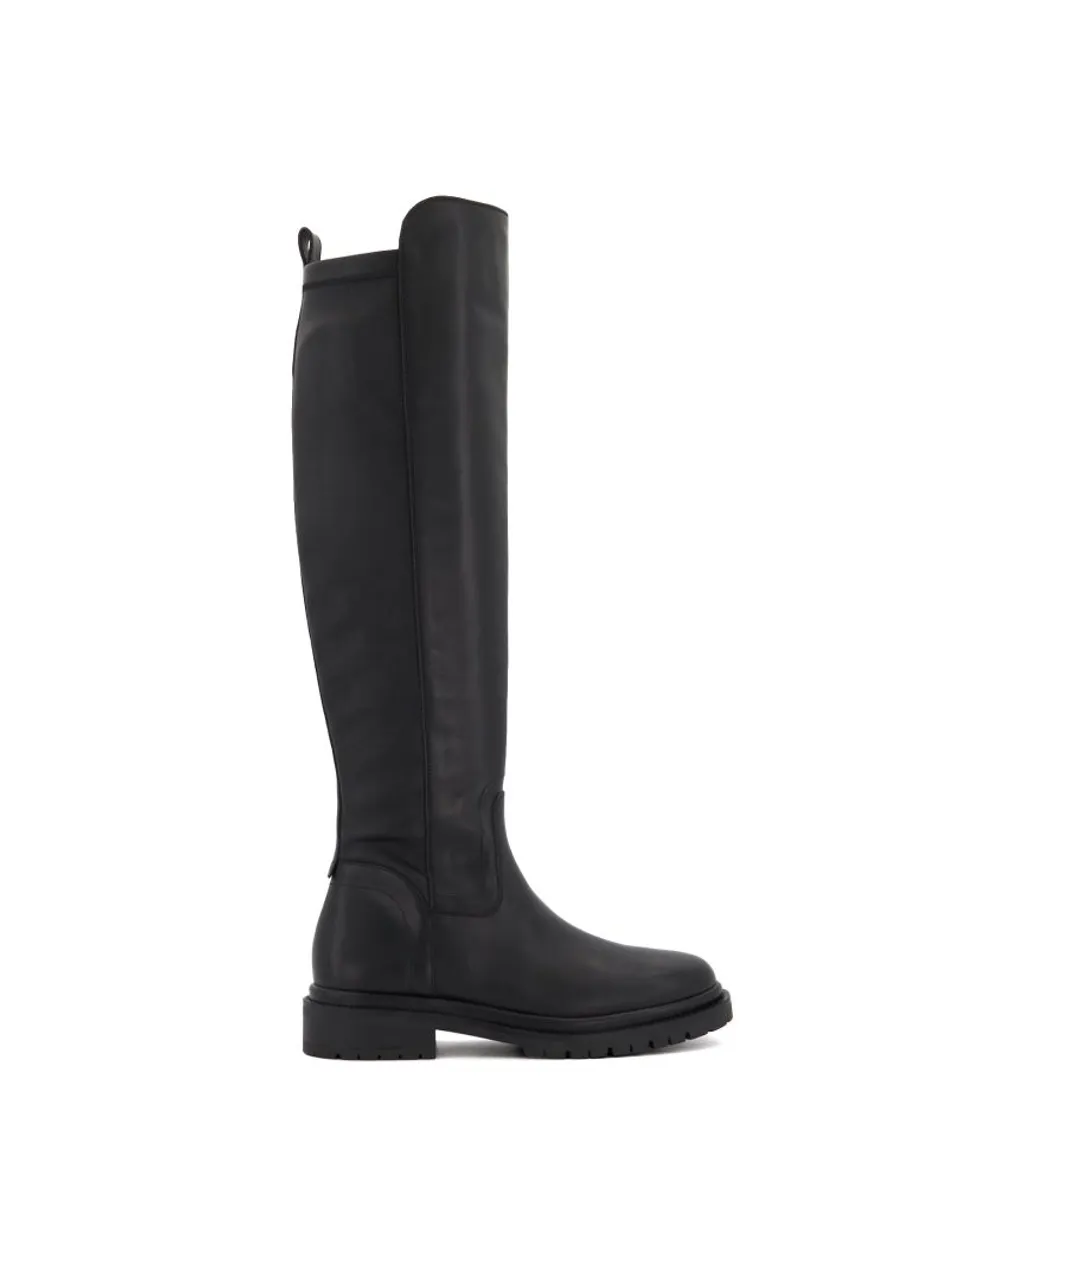 Dune London Womens Ladies Tempar - Cleather-Sole Knee-High Boots - Black Leather (archived)